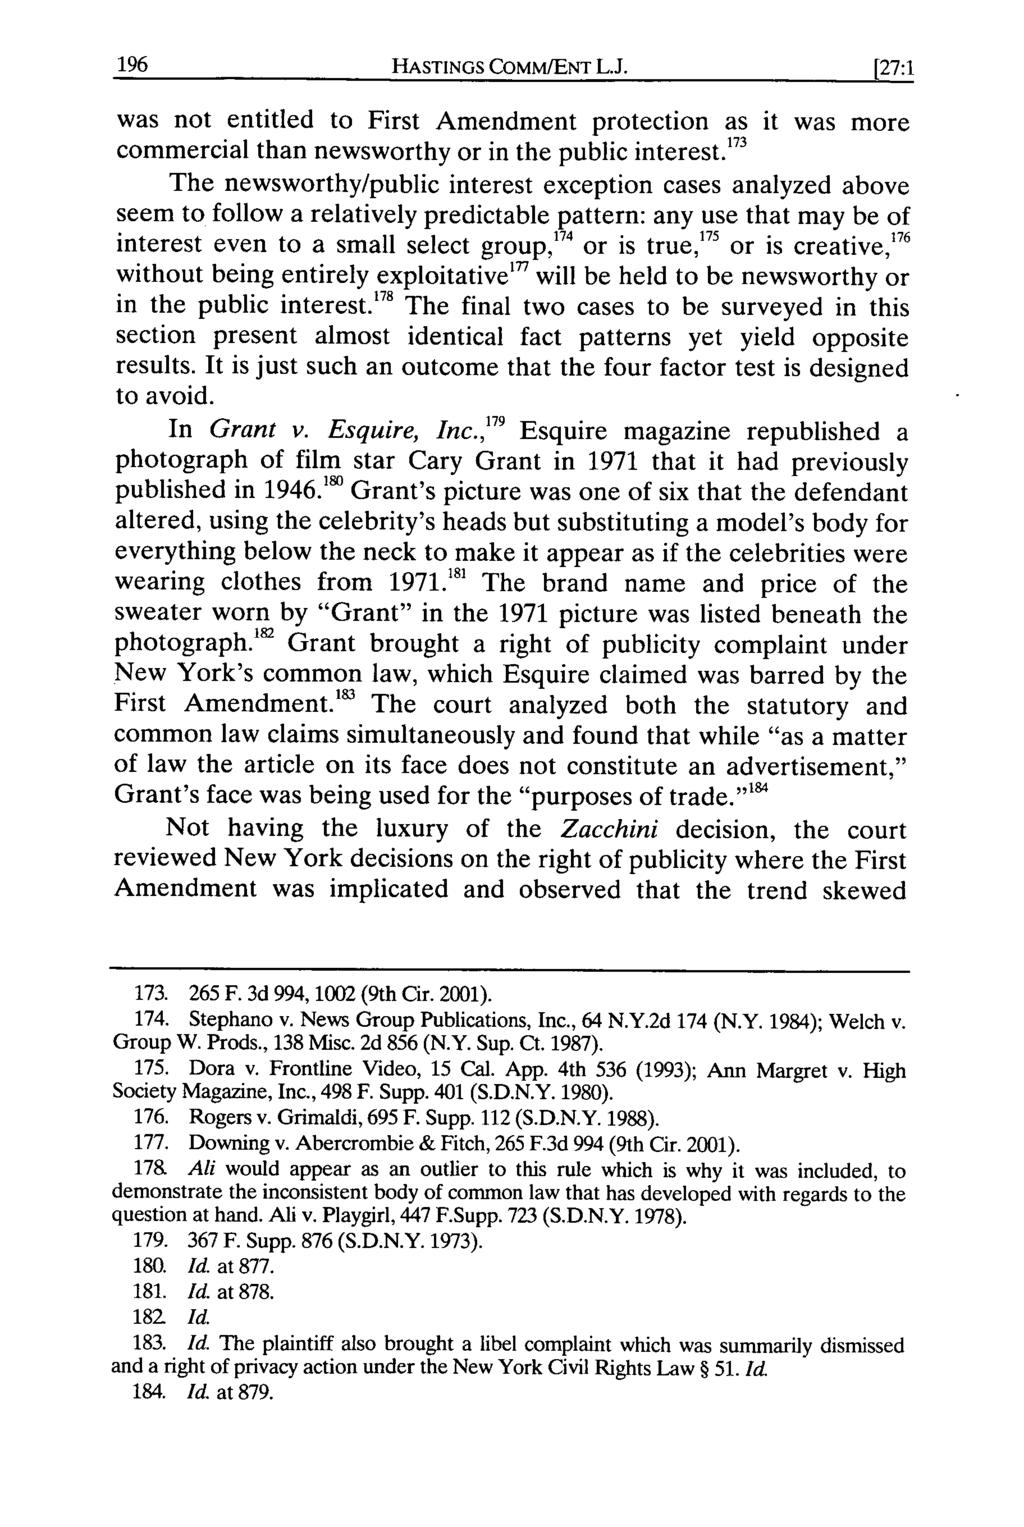 196 HASTINGS COMM/ENT L.J. [27:1 was not entitled to First Amendment protection as it was more 113 commercial than newsworthy or in the public interest.